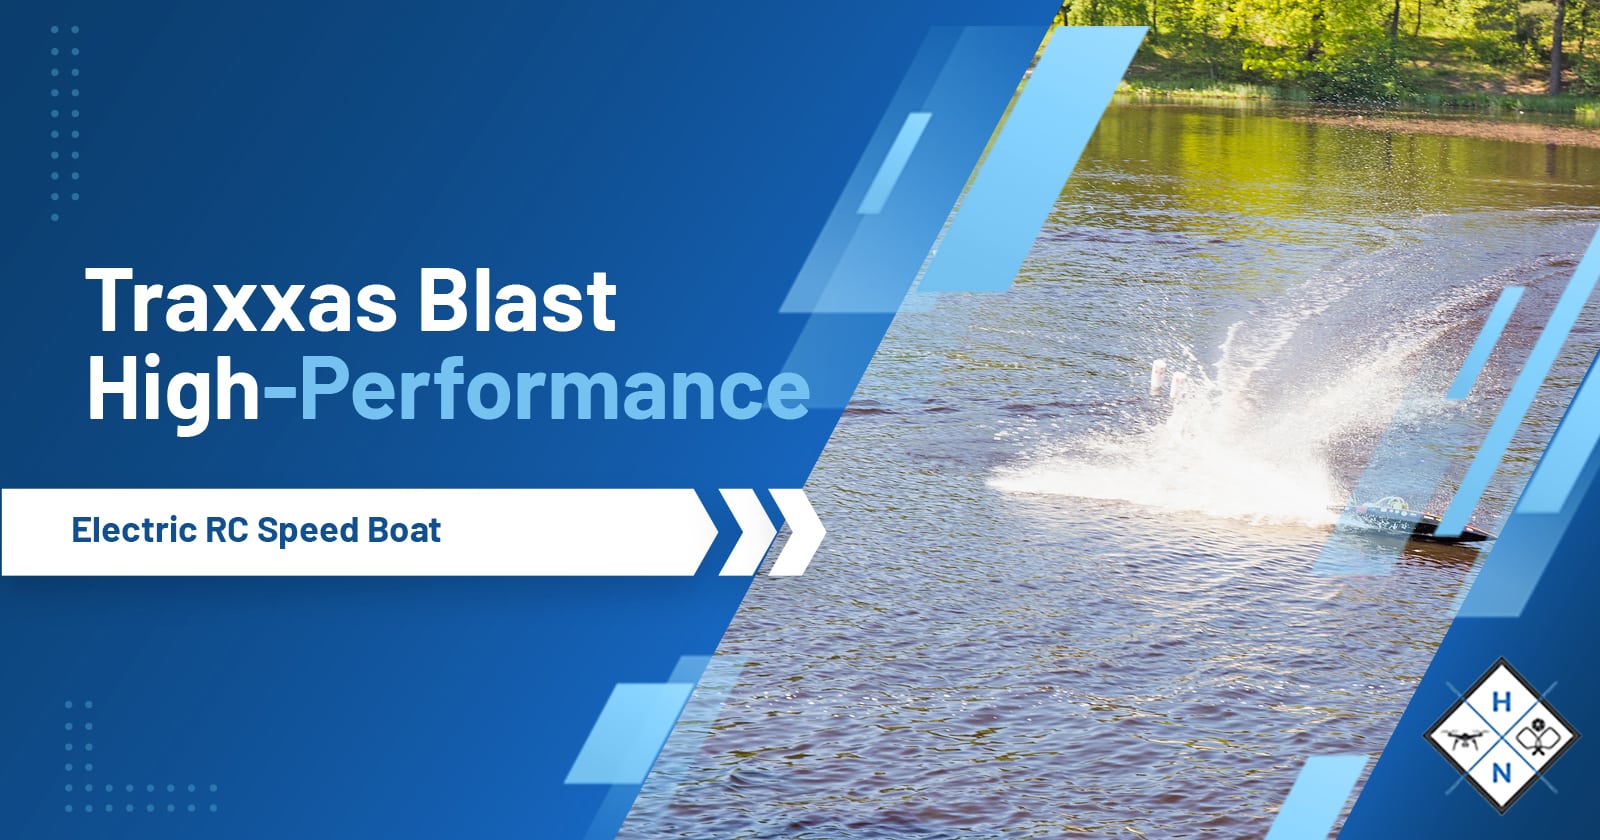 Traxxas Blast: High-Performance Electric RC Speed Boat